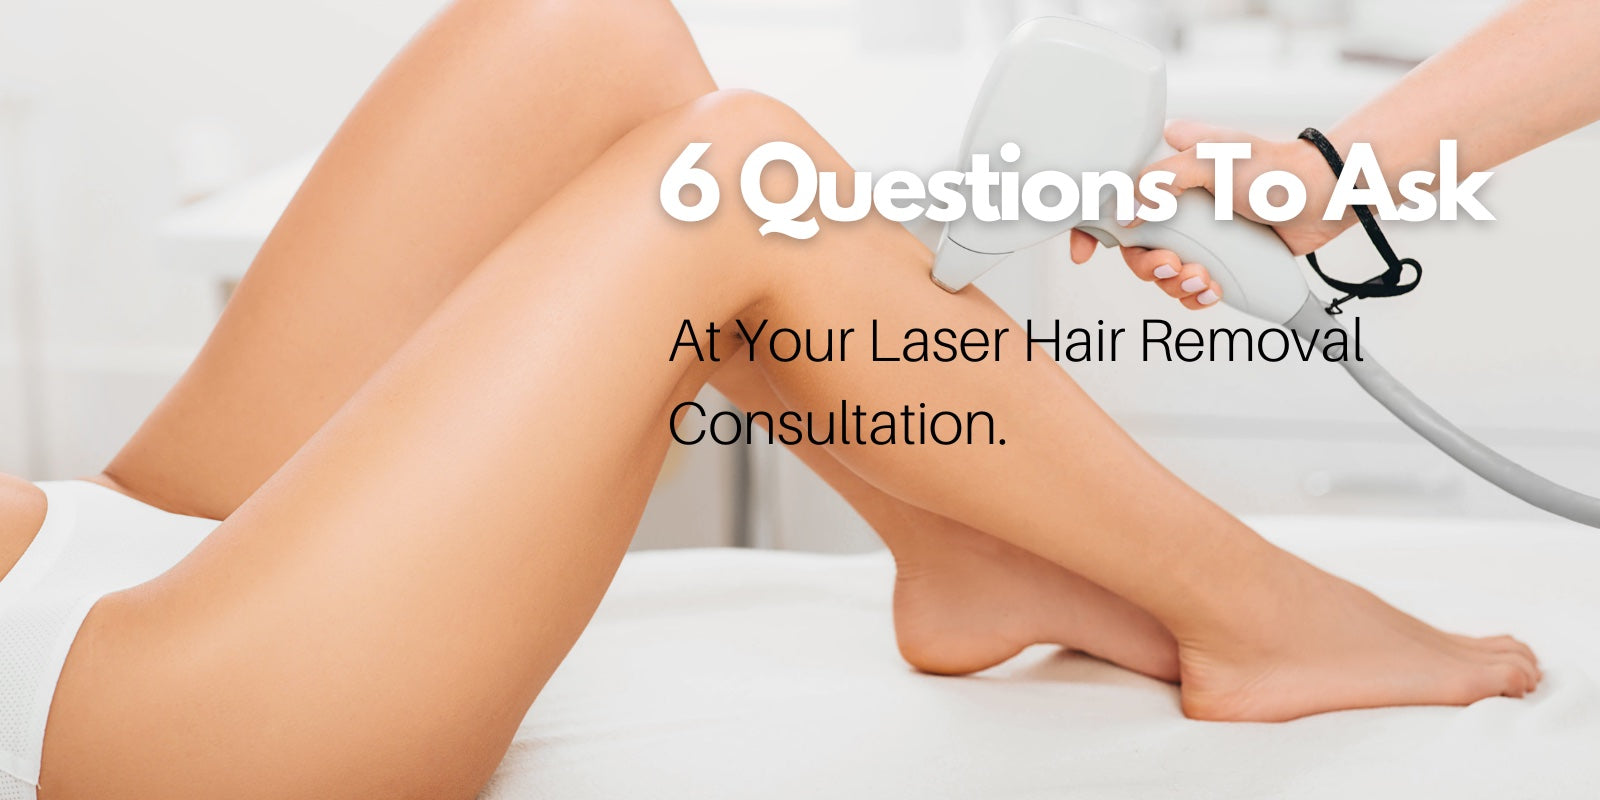 laser hair removal Victoria bc. questions to ask.